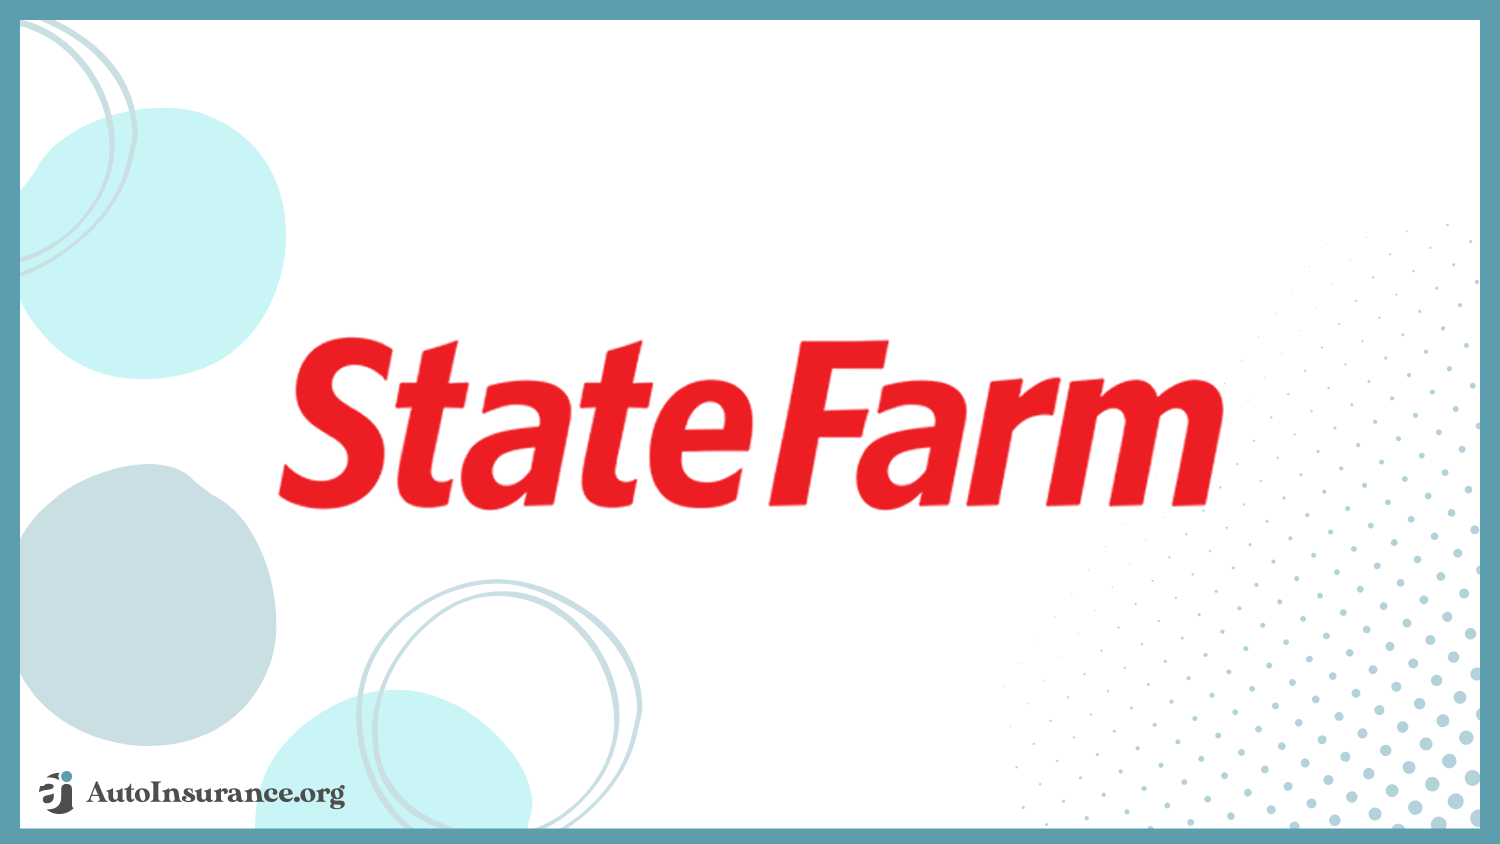 State Farm: Best Auto Insurance for Drivers Under 25